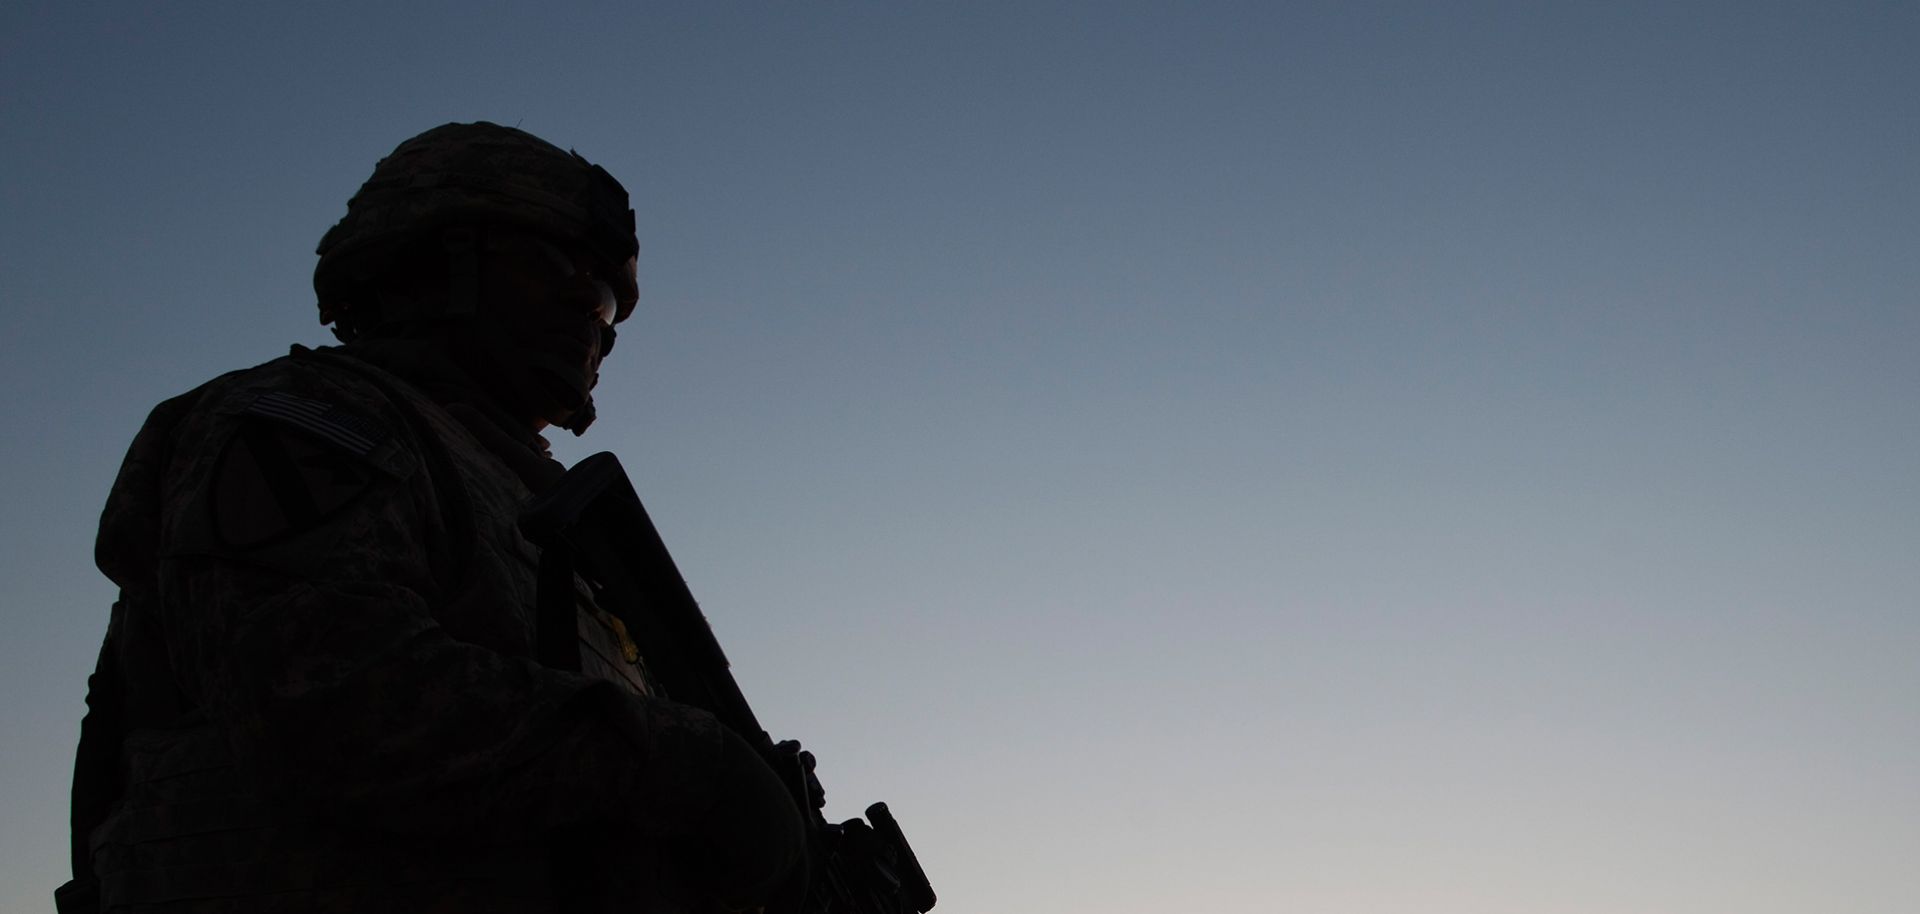 A U.S. soldier near the Iraq-Kuwait border, part of the last U.S. military convoy to leave Iraq in late 2011.